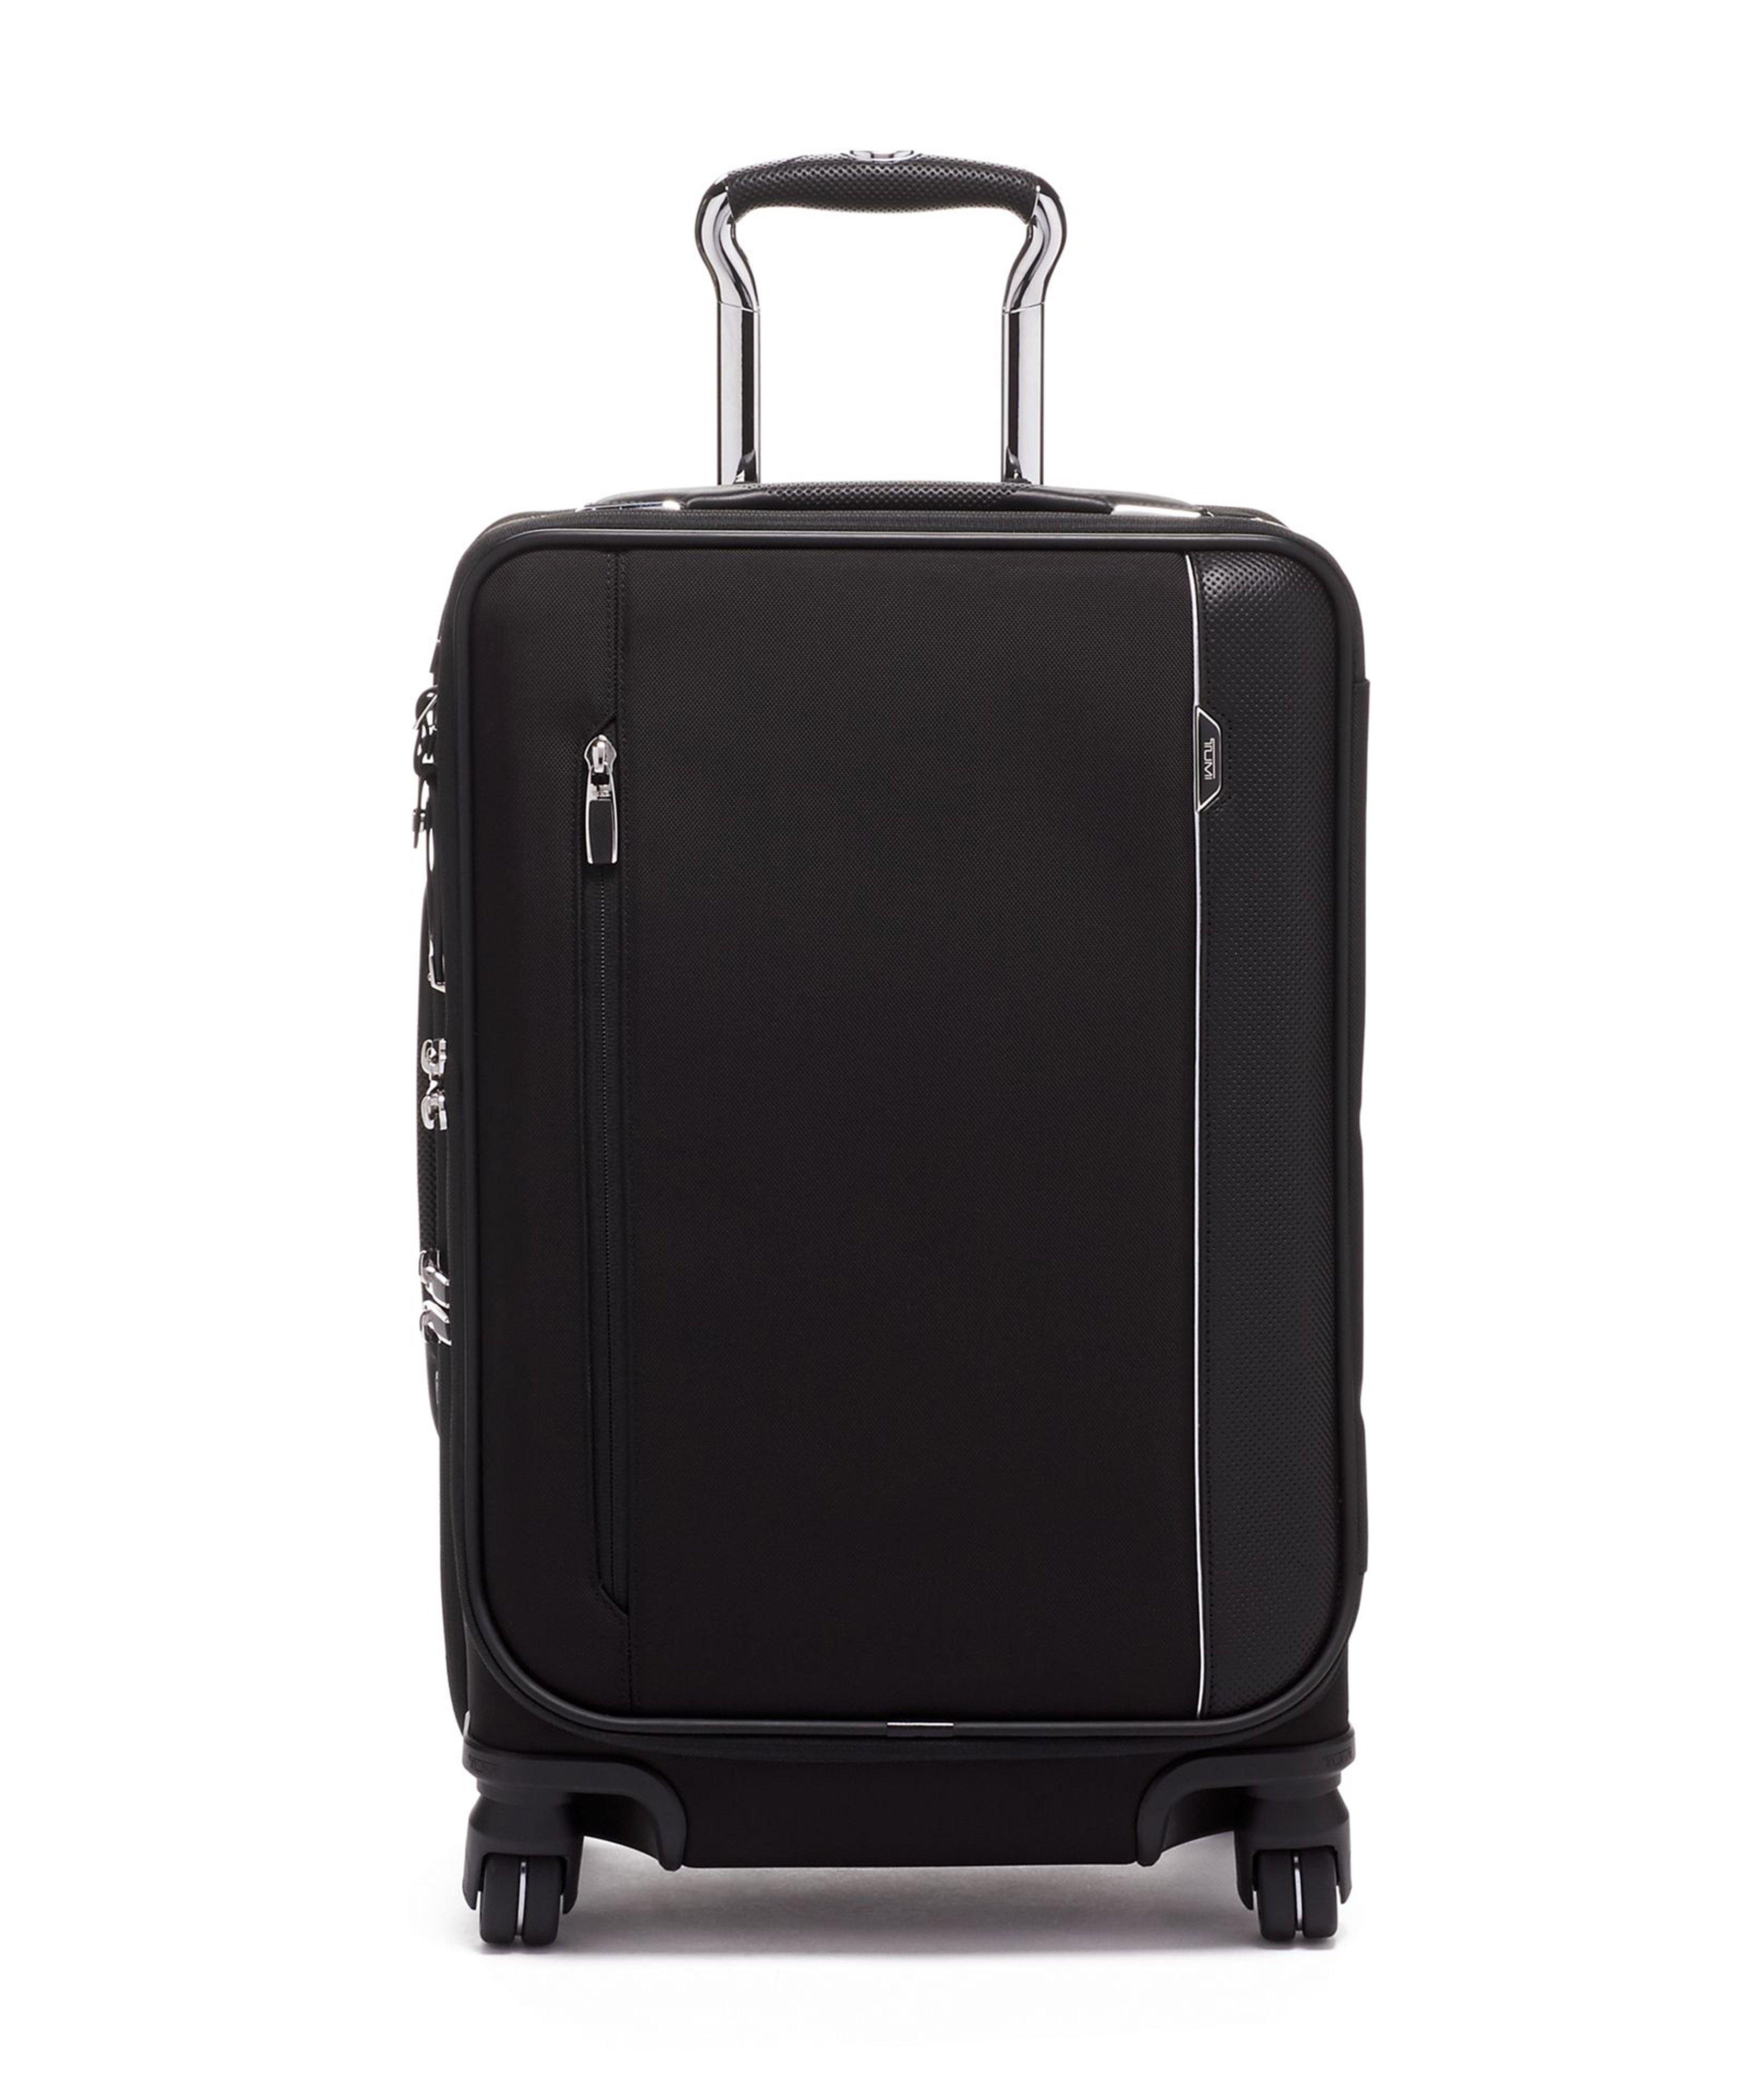 Extended Trip Dual Access 4 Wheeled Packing Case image 0